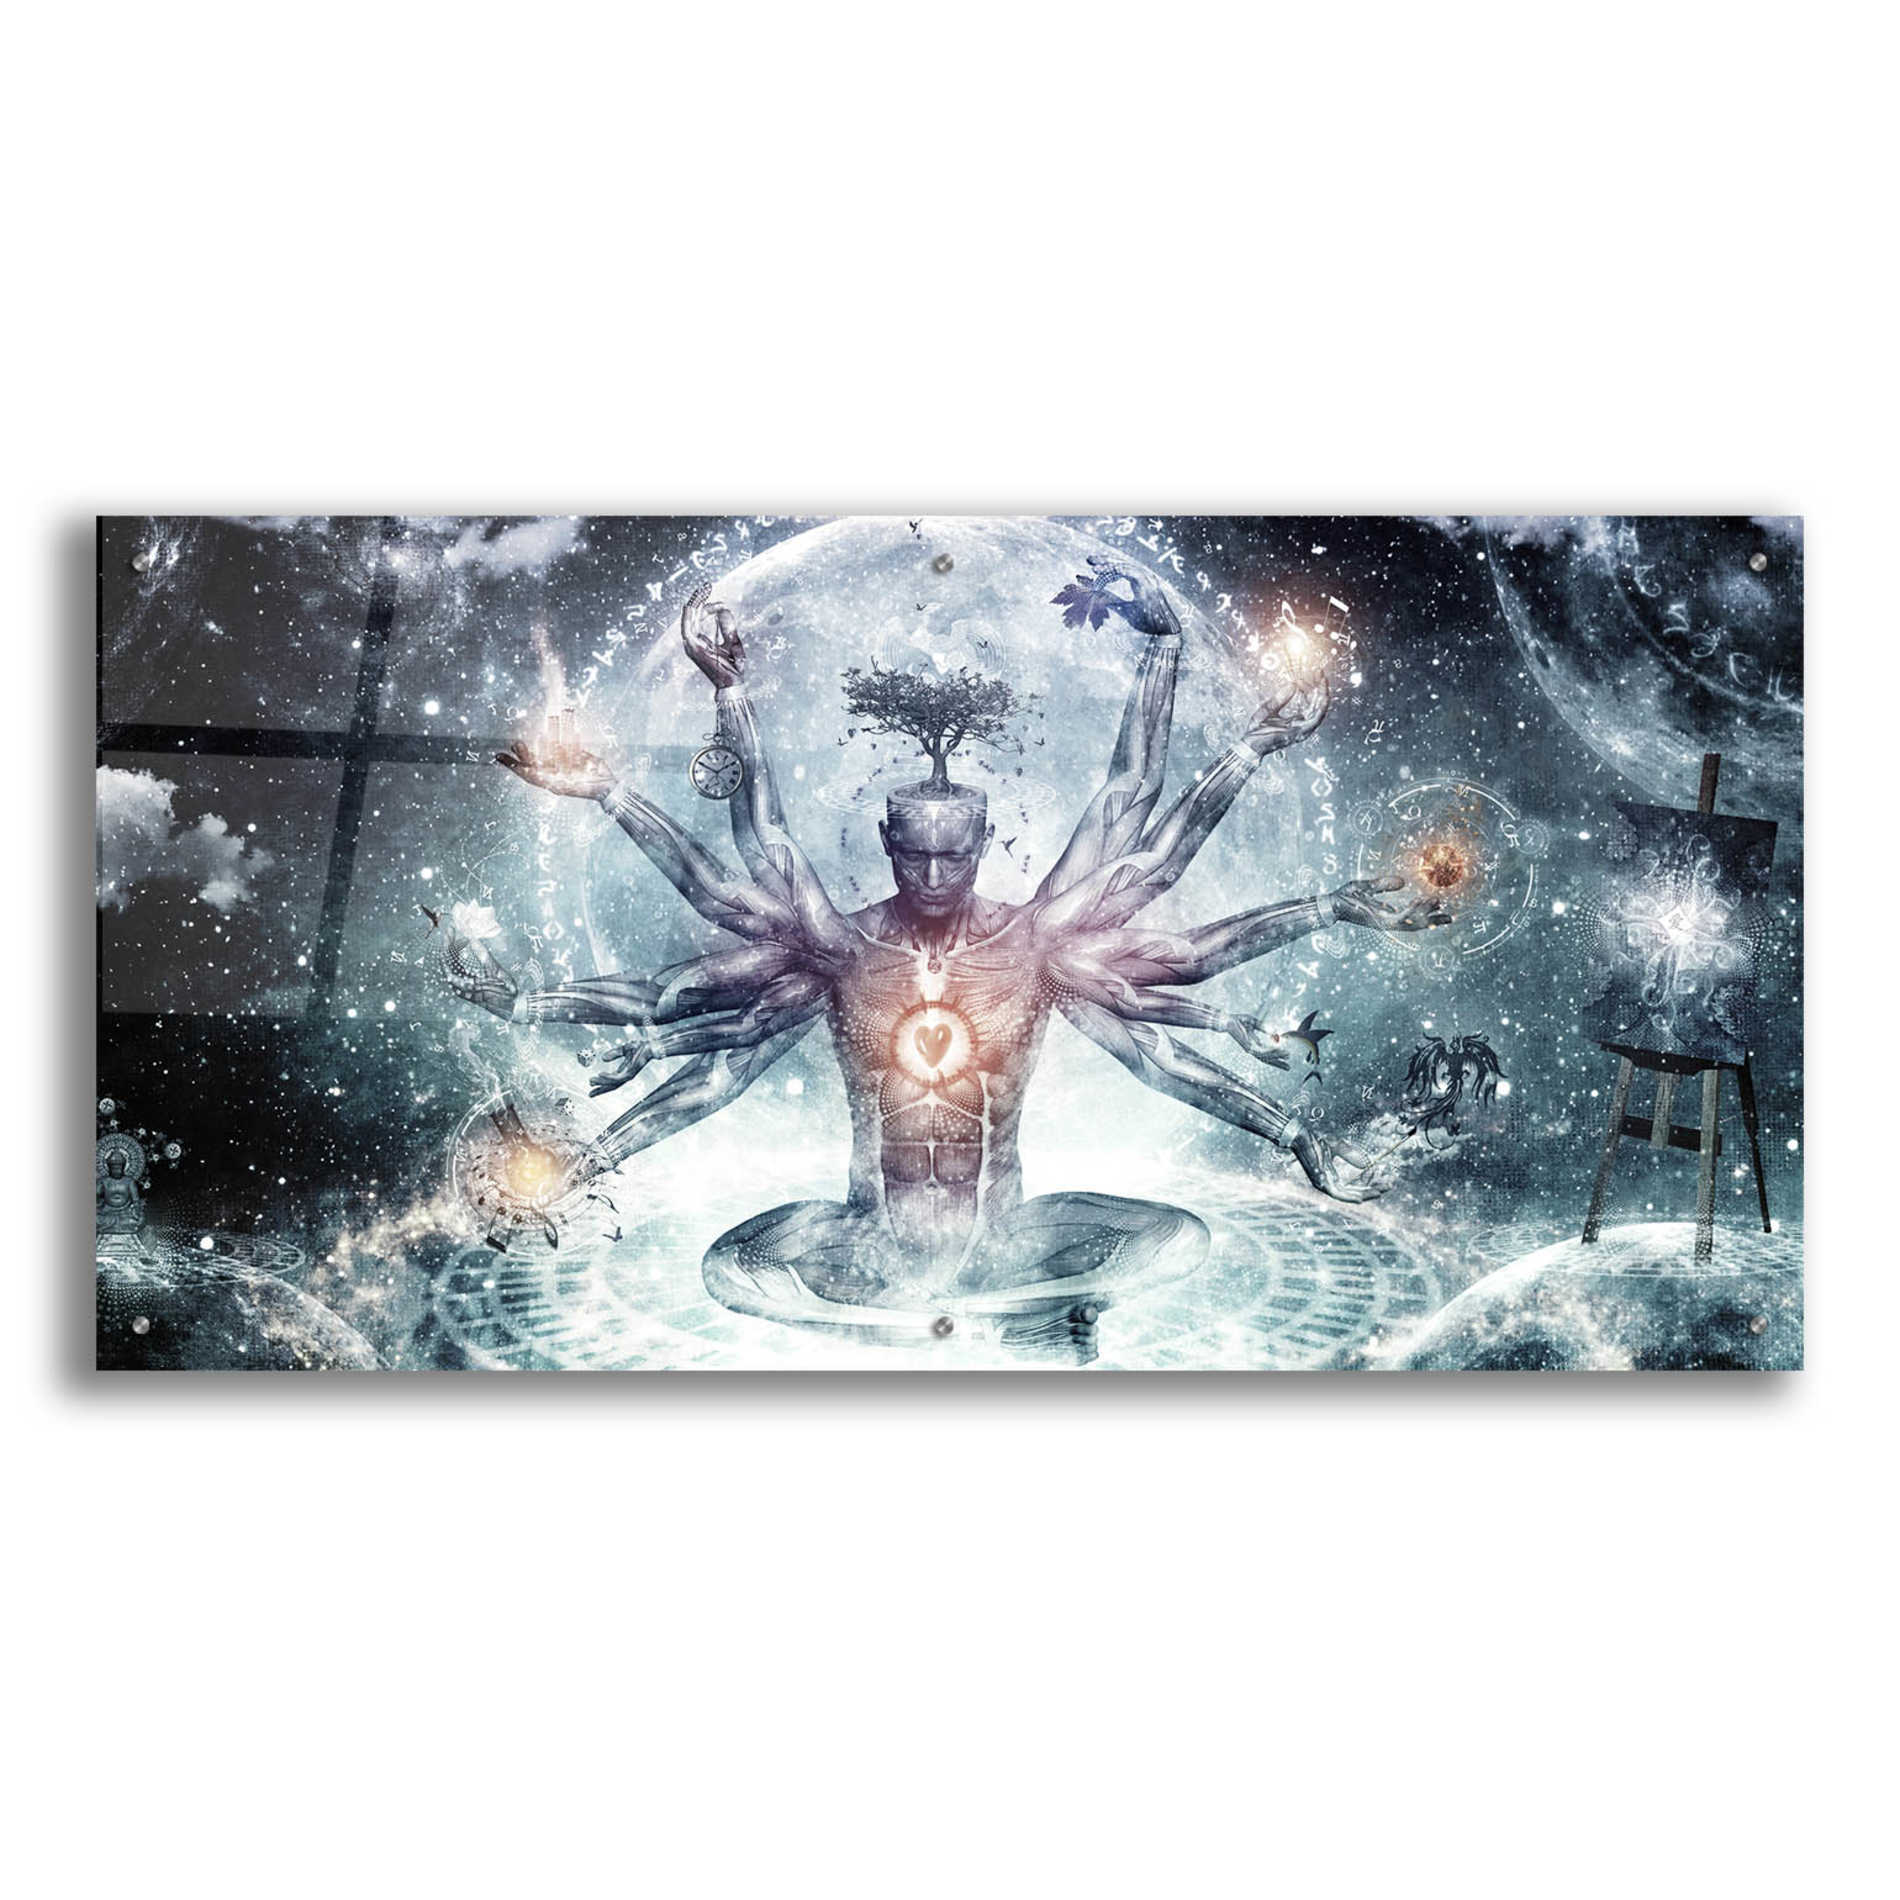 Epic Art 'The Neverending Dreamer' by Cameron Gray, Acrylic Glass Wall Art,48x24